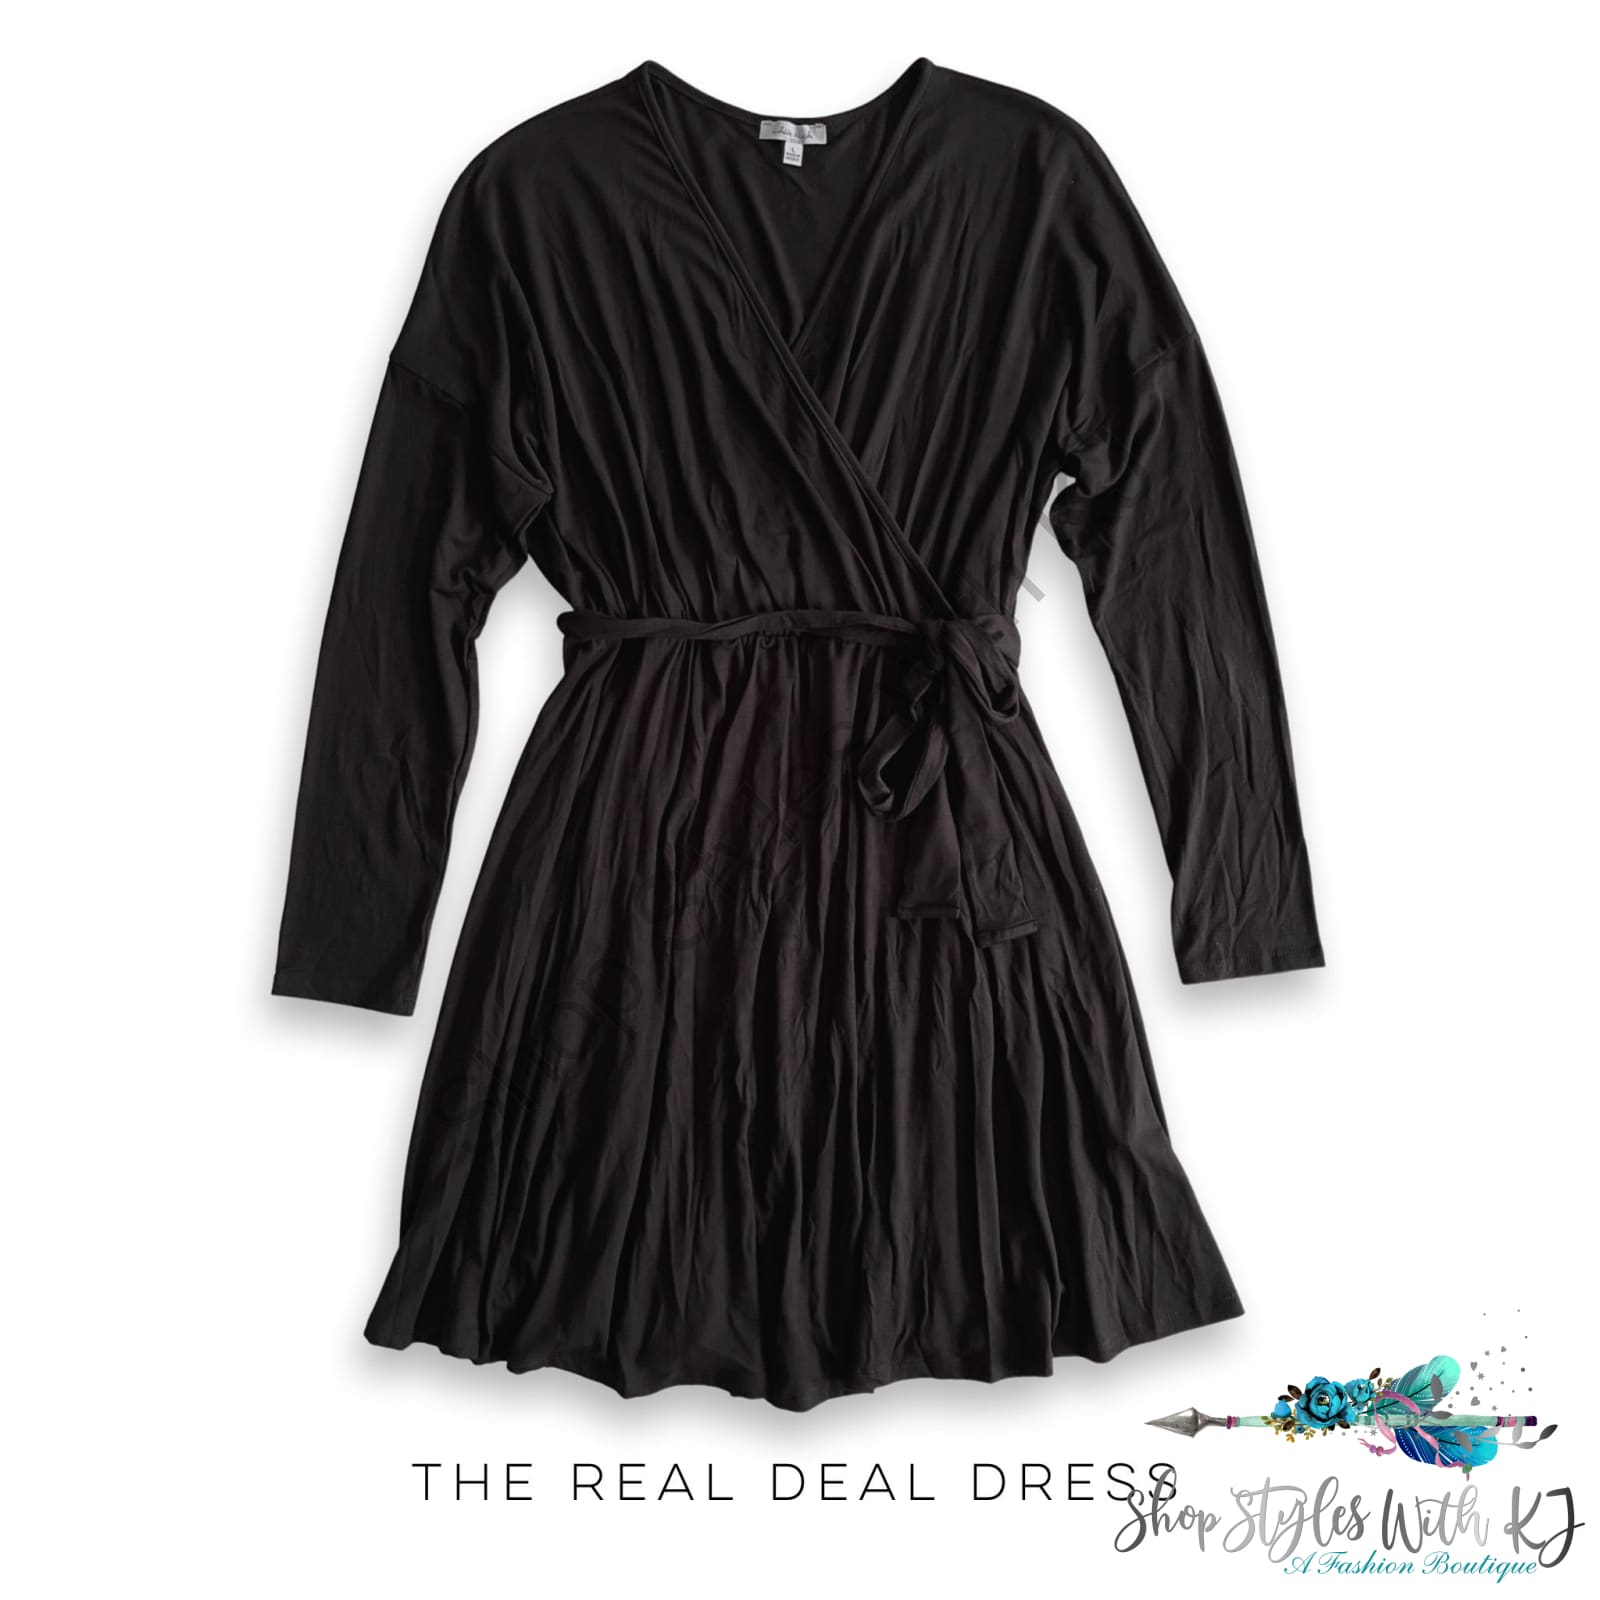 The Real Deal Dress White Birch